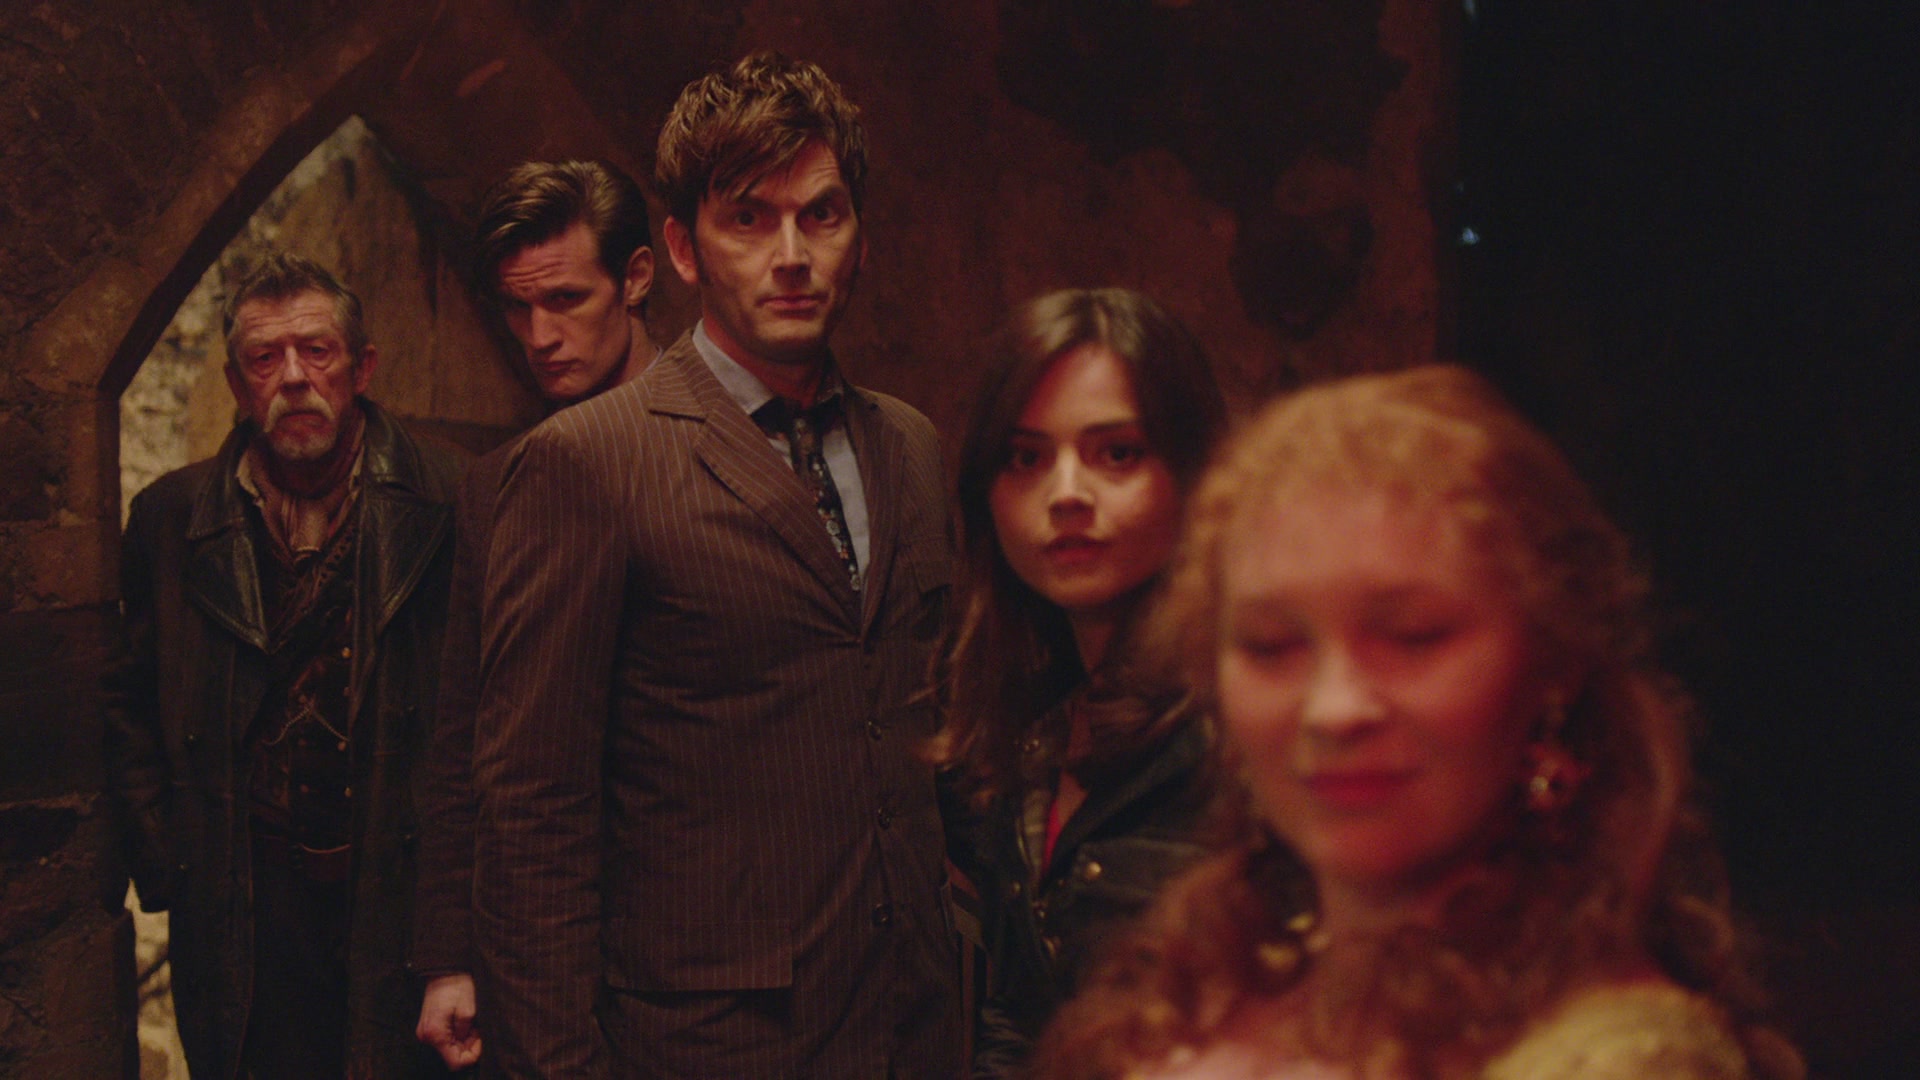 DayOfTheDoctor-Caps-0779.jpg